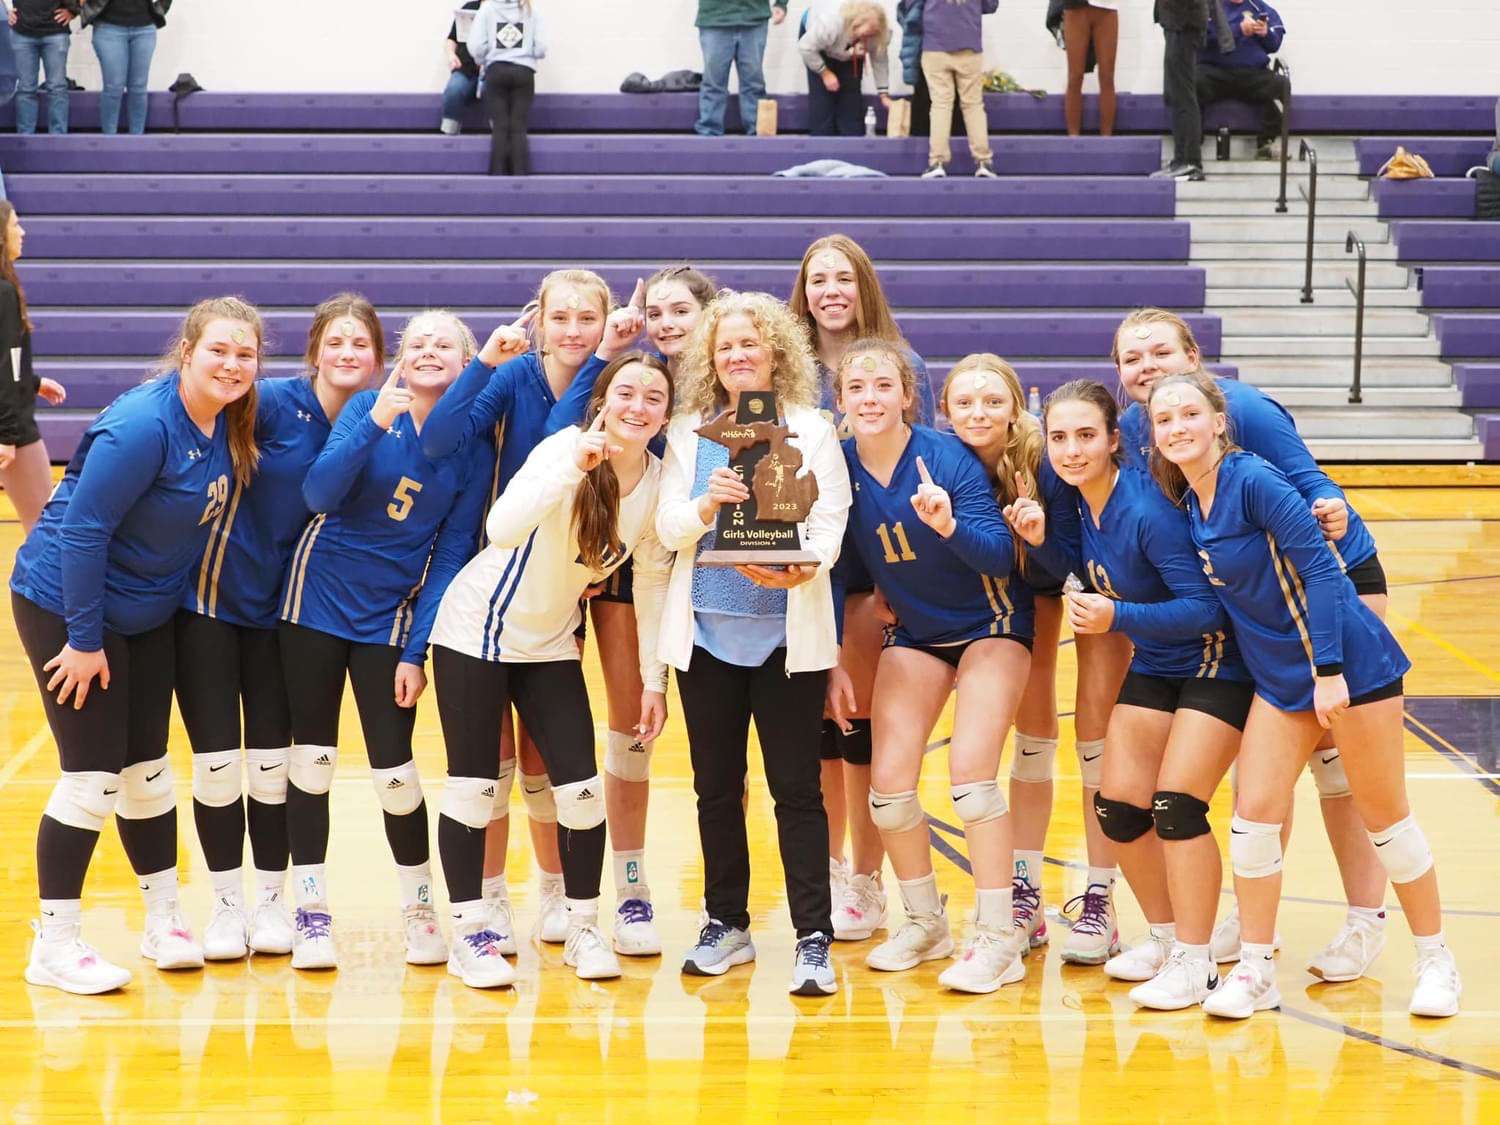 The Onekama Portagers 2023 district champion volleyball team celebrates their district finals victory.